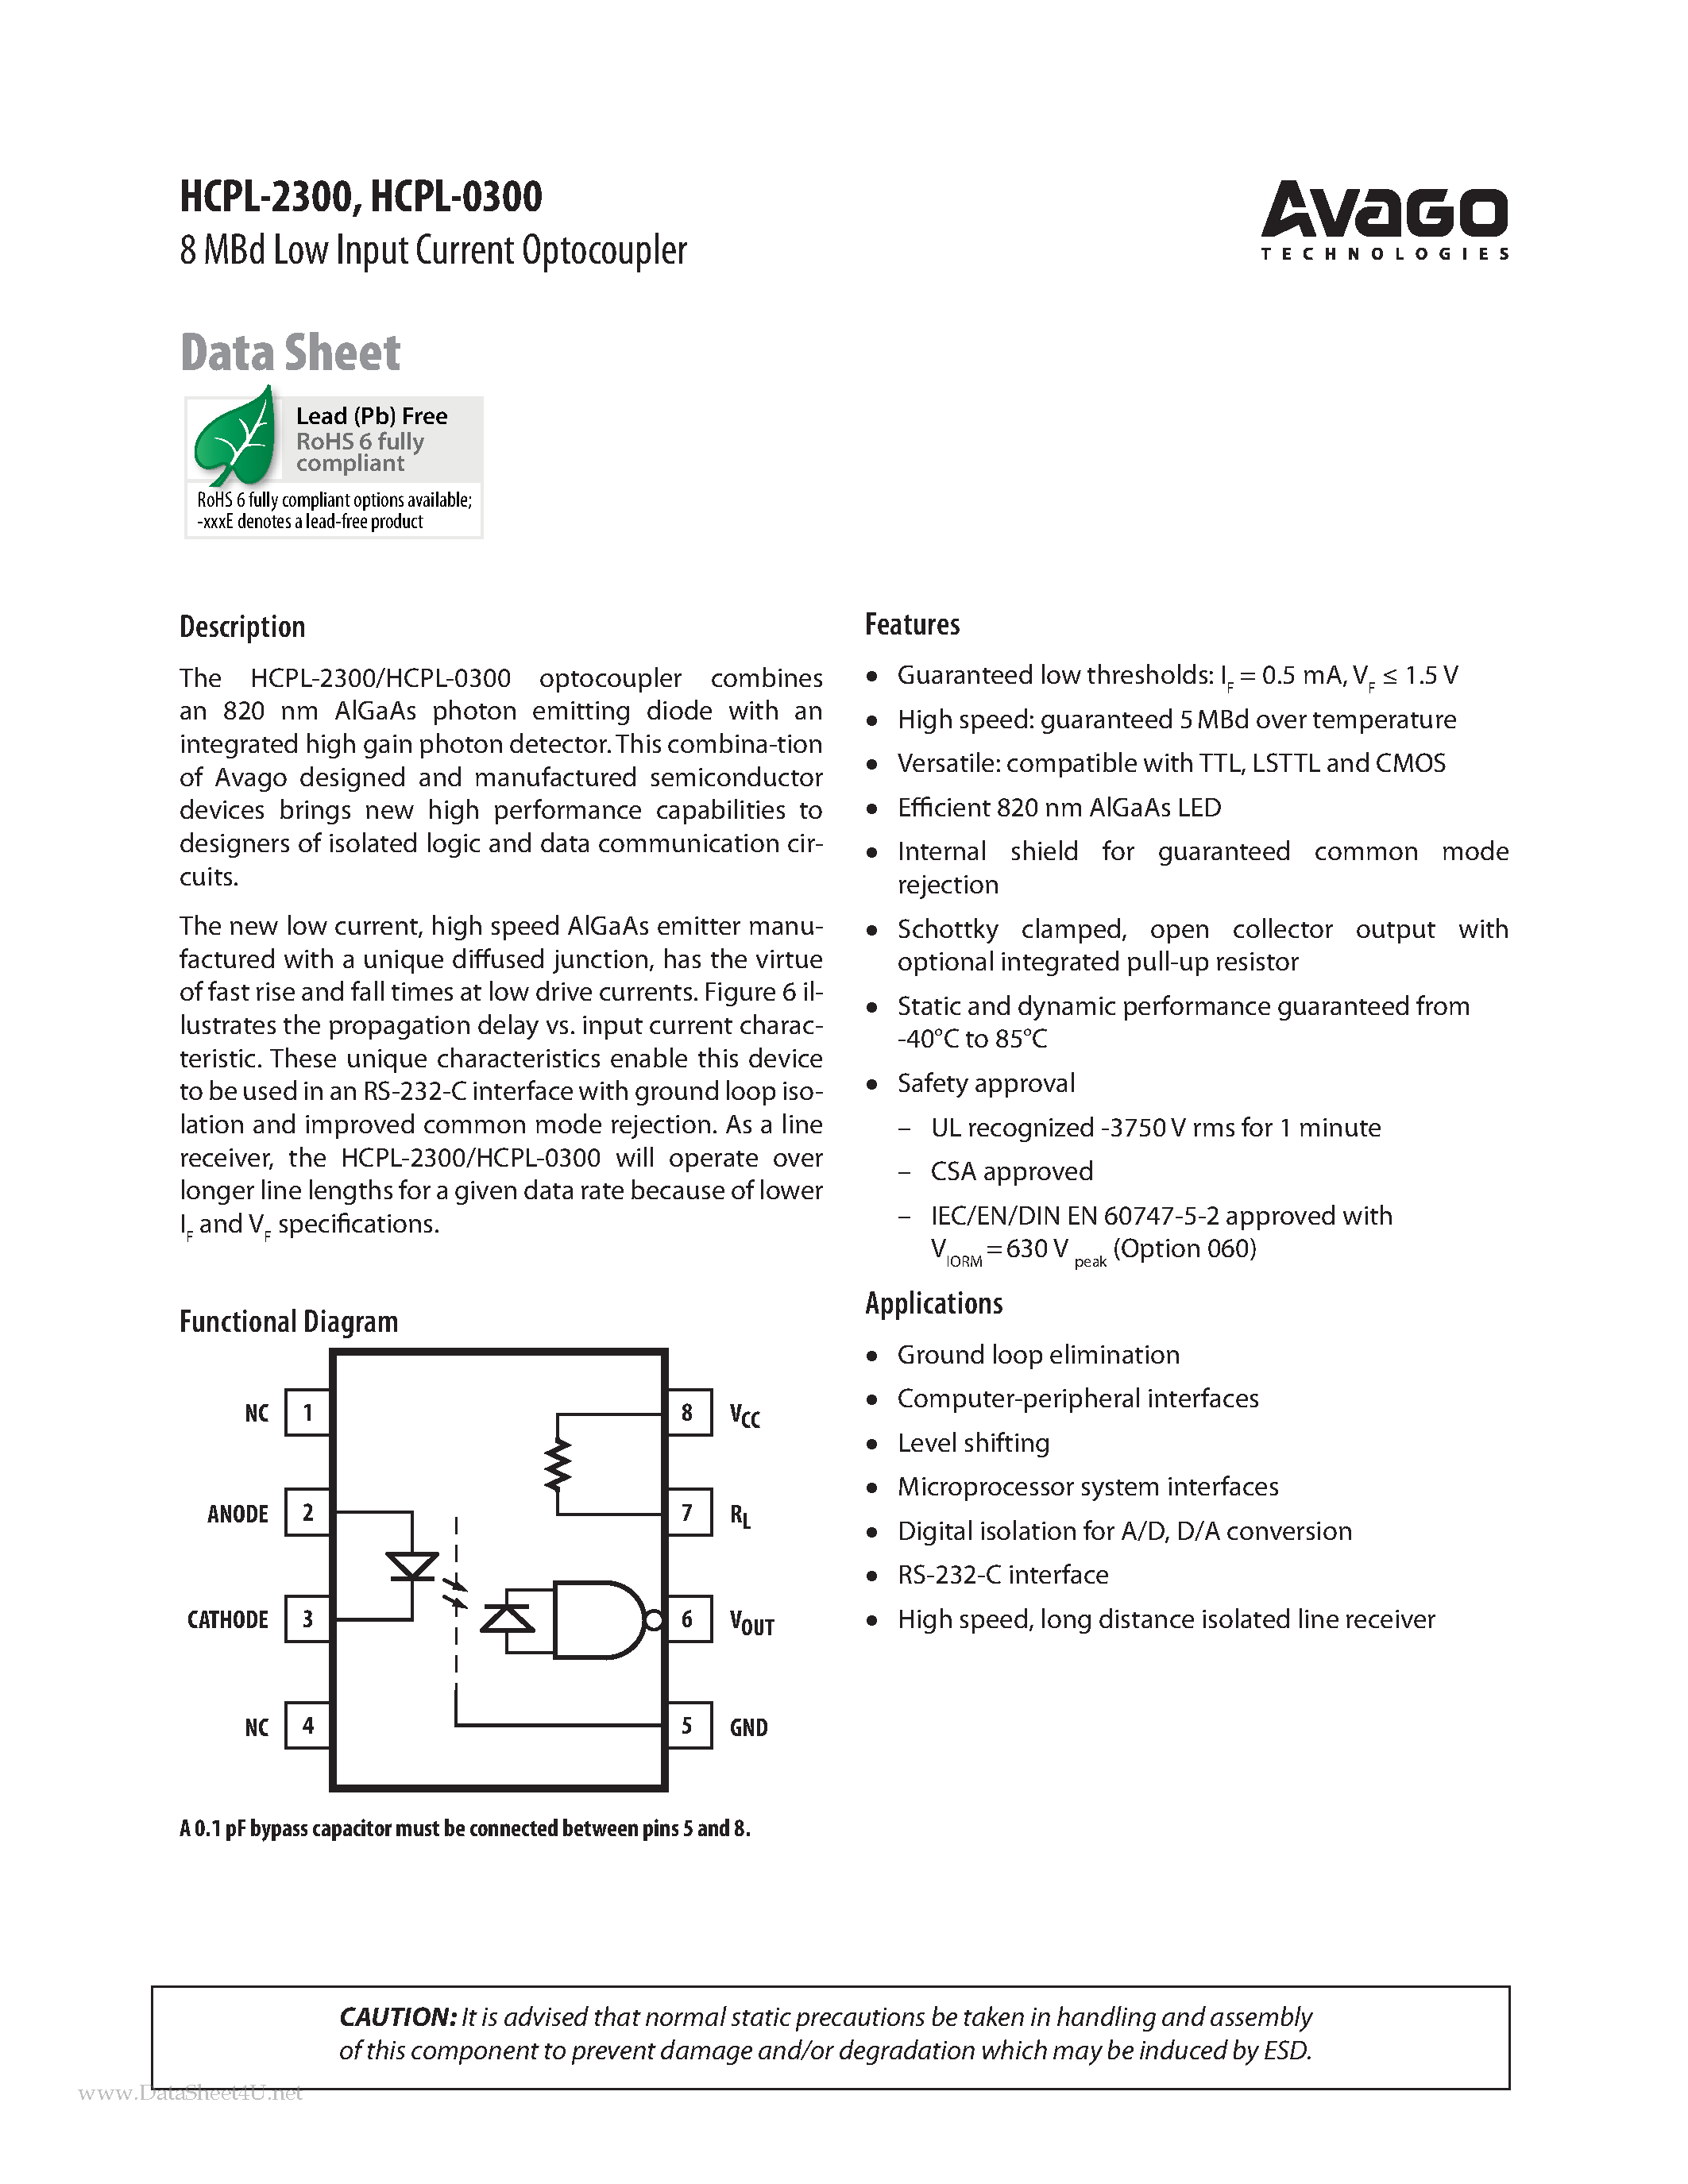 Даташит HCPL-0300 - (HCPL-0300 / HCPL-2300) 8 MBd Low Input Current Optocoupler страница 1